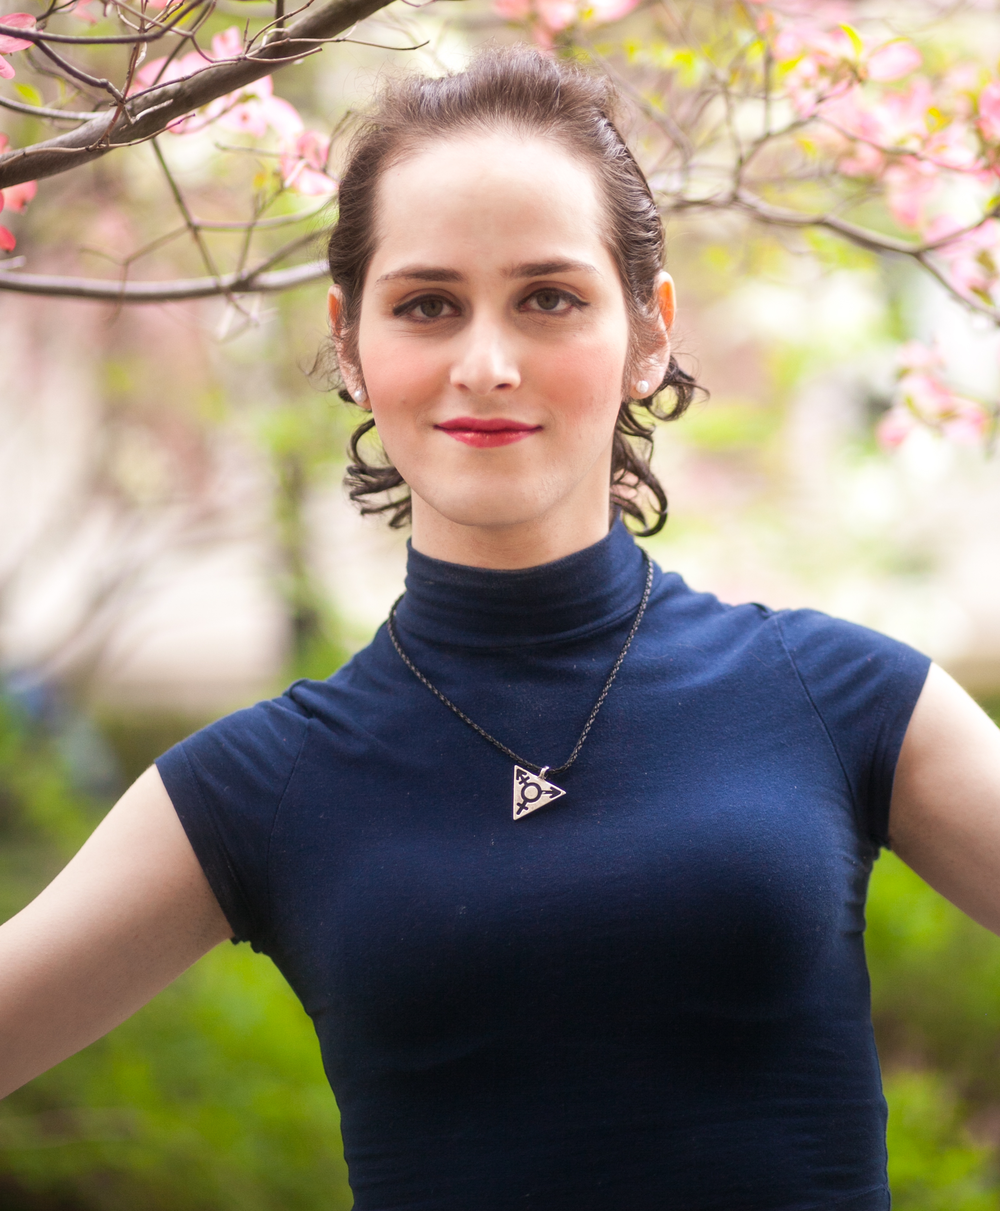 From Rabbi to Trans Activist" With Abby Stein.